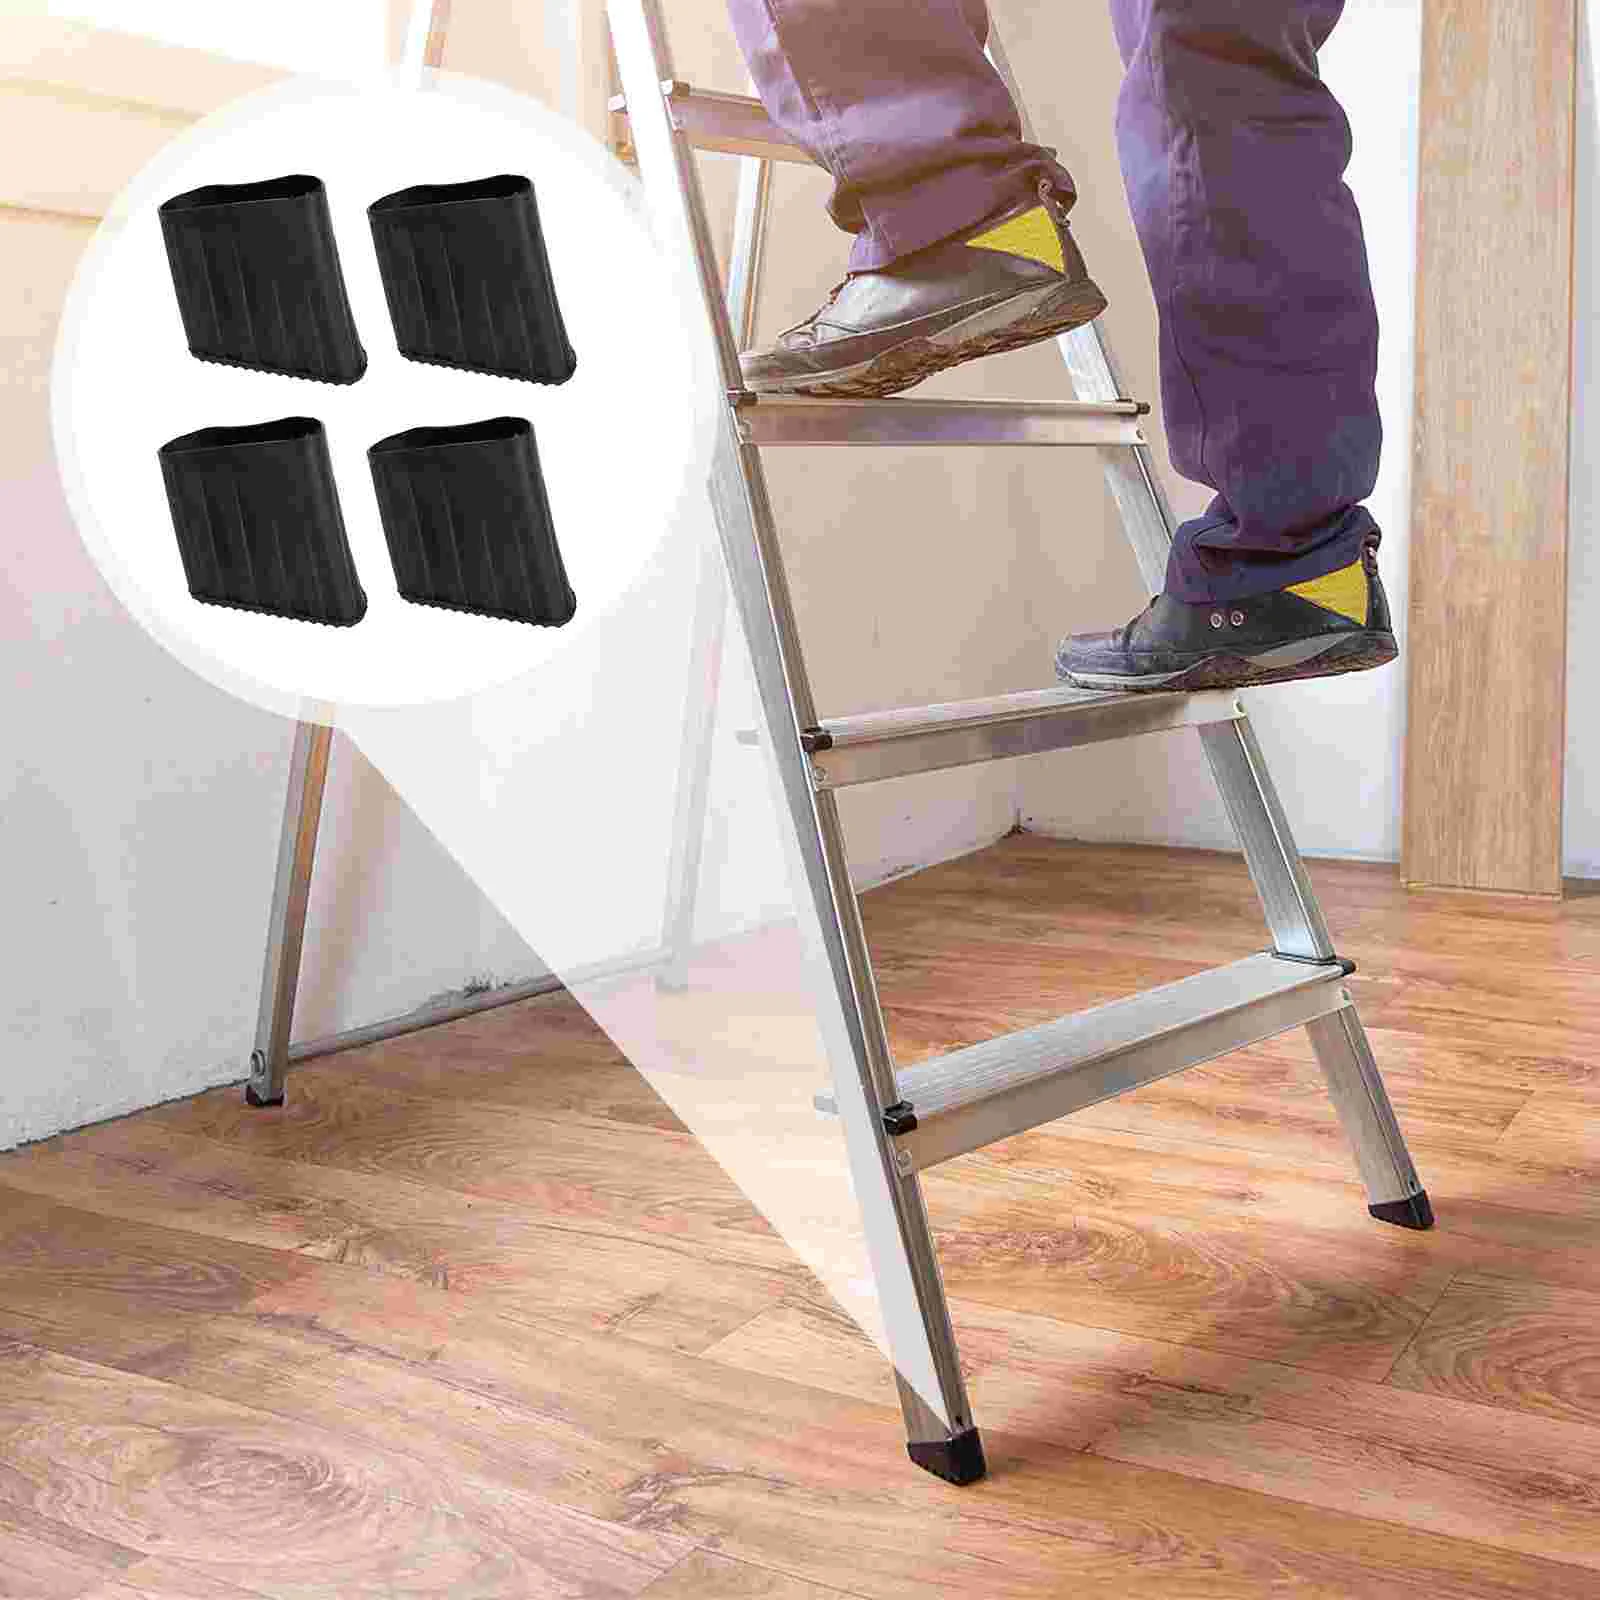 

4 Pcs Accessories for Ladder Feet Protect Cover Non-slip Pads Floor Rest Mat Folding Covers Legs Rubber Protector